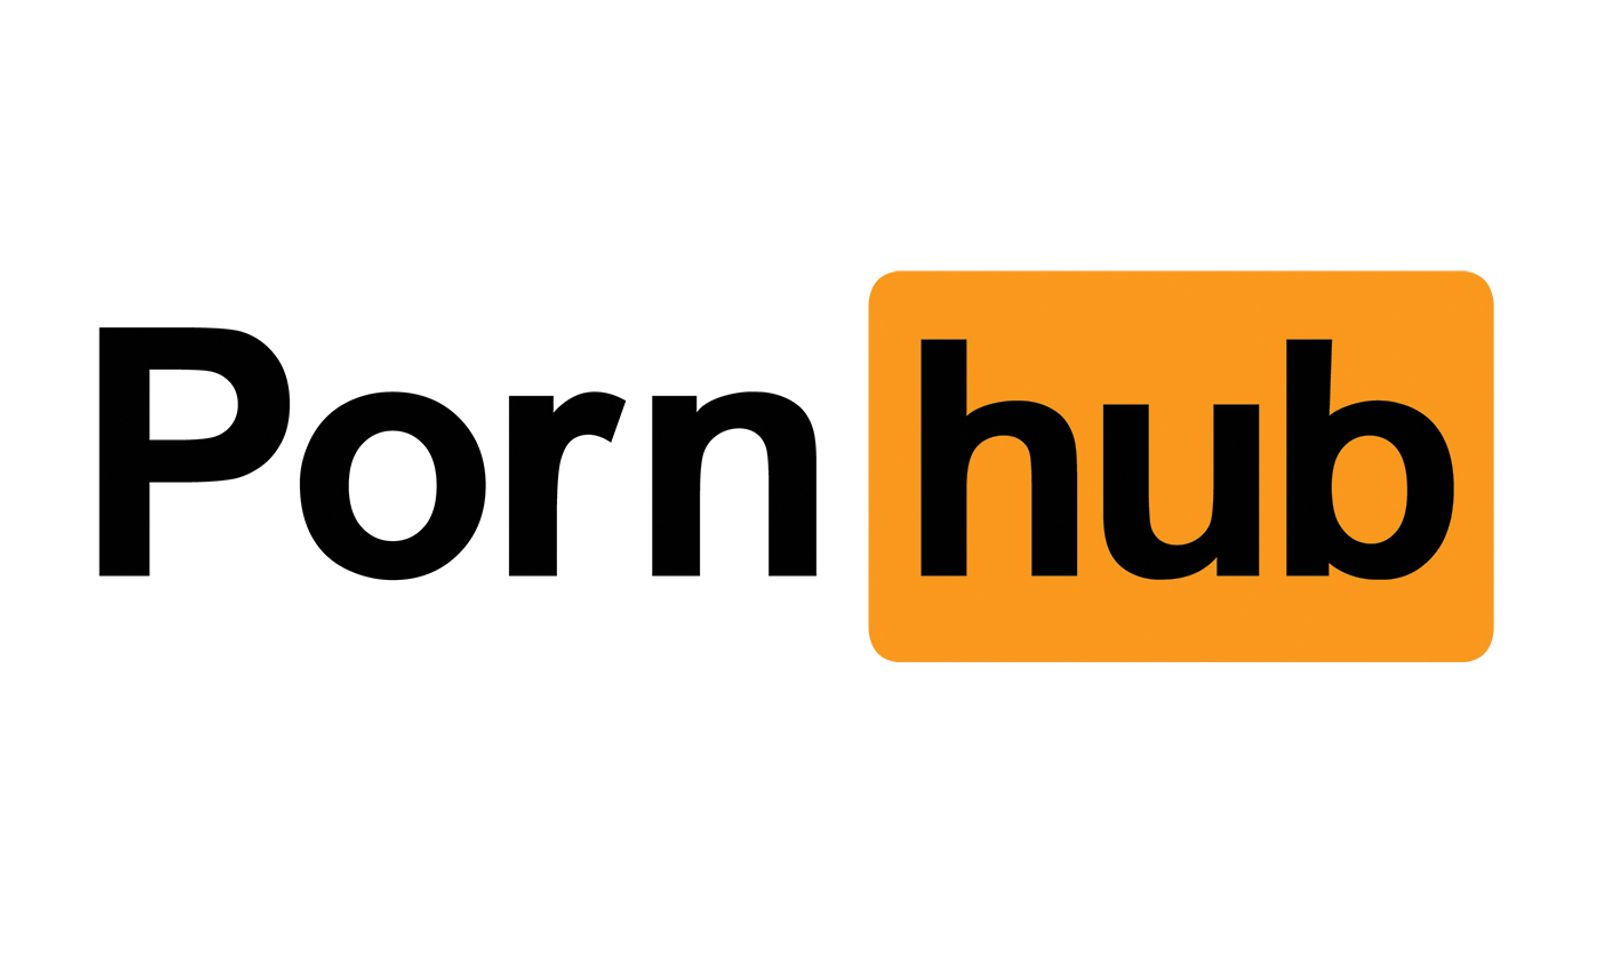 Pornhub Brings Home a Win from 2013 AVN Awards